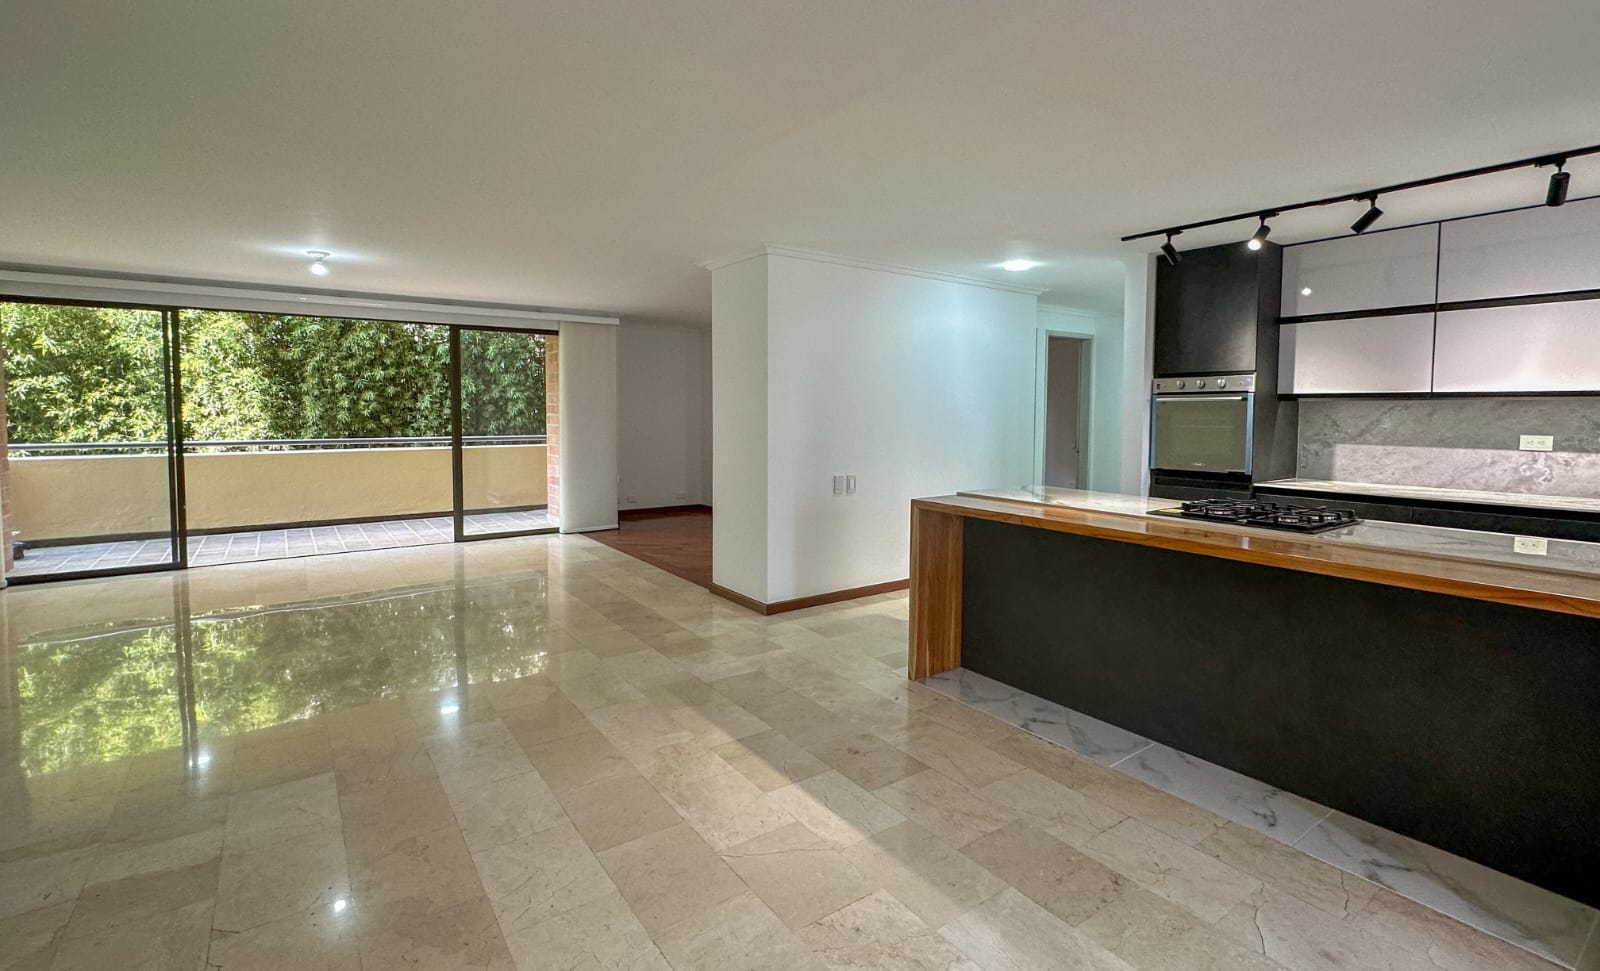 Below Market, Completely Remodeled El Poblado Apartment With Modern Finishing’s, Open Design, and Two Balconies